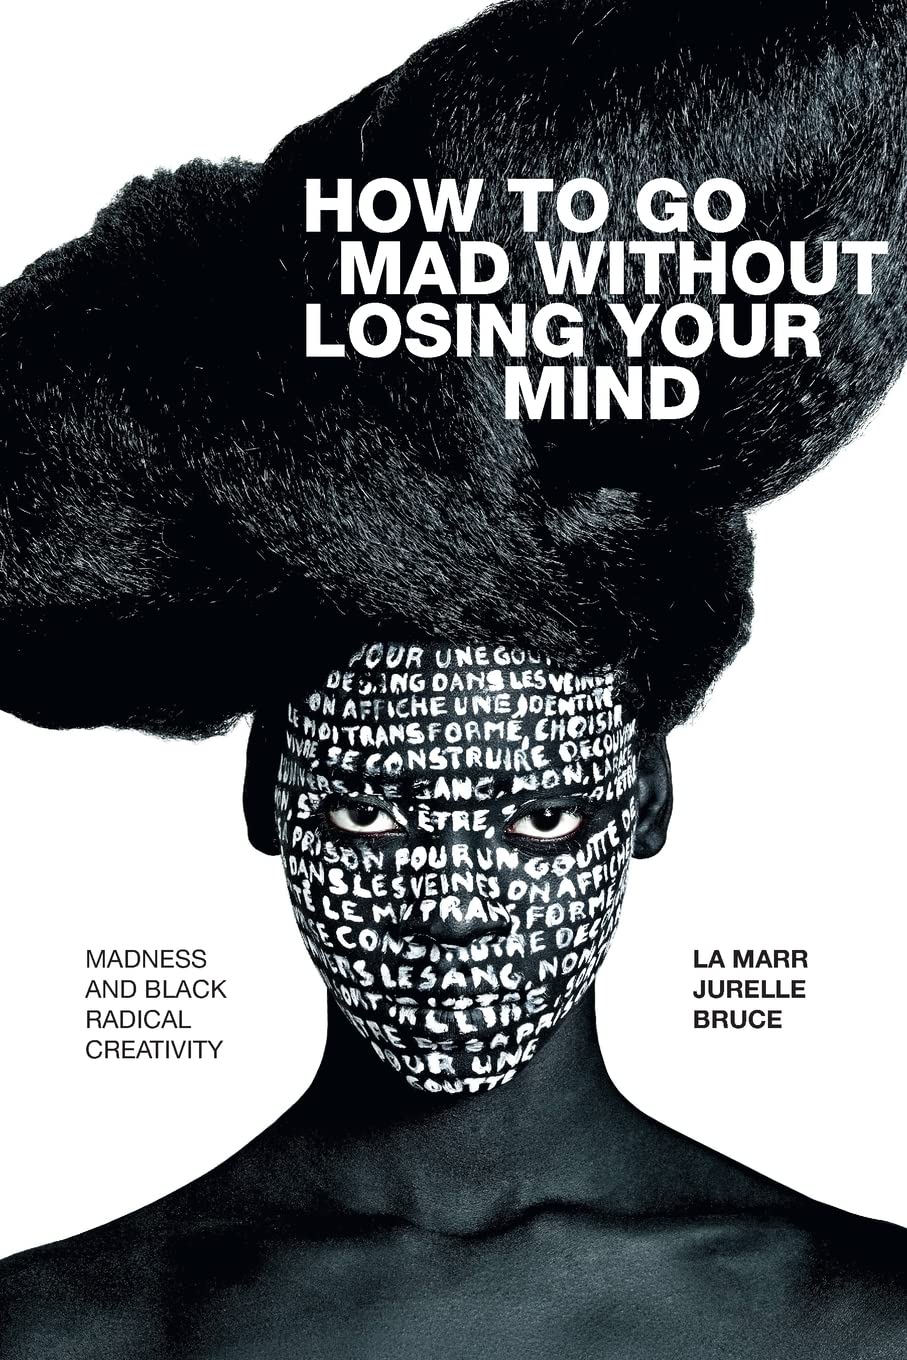 The cover of How to Go Mad without Losing Your Mind: Madness and Black Radical Creativity